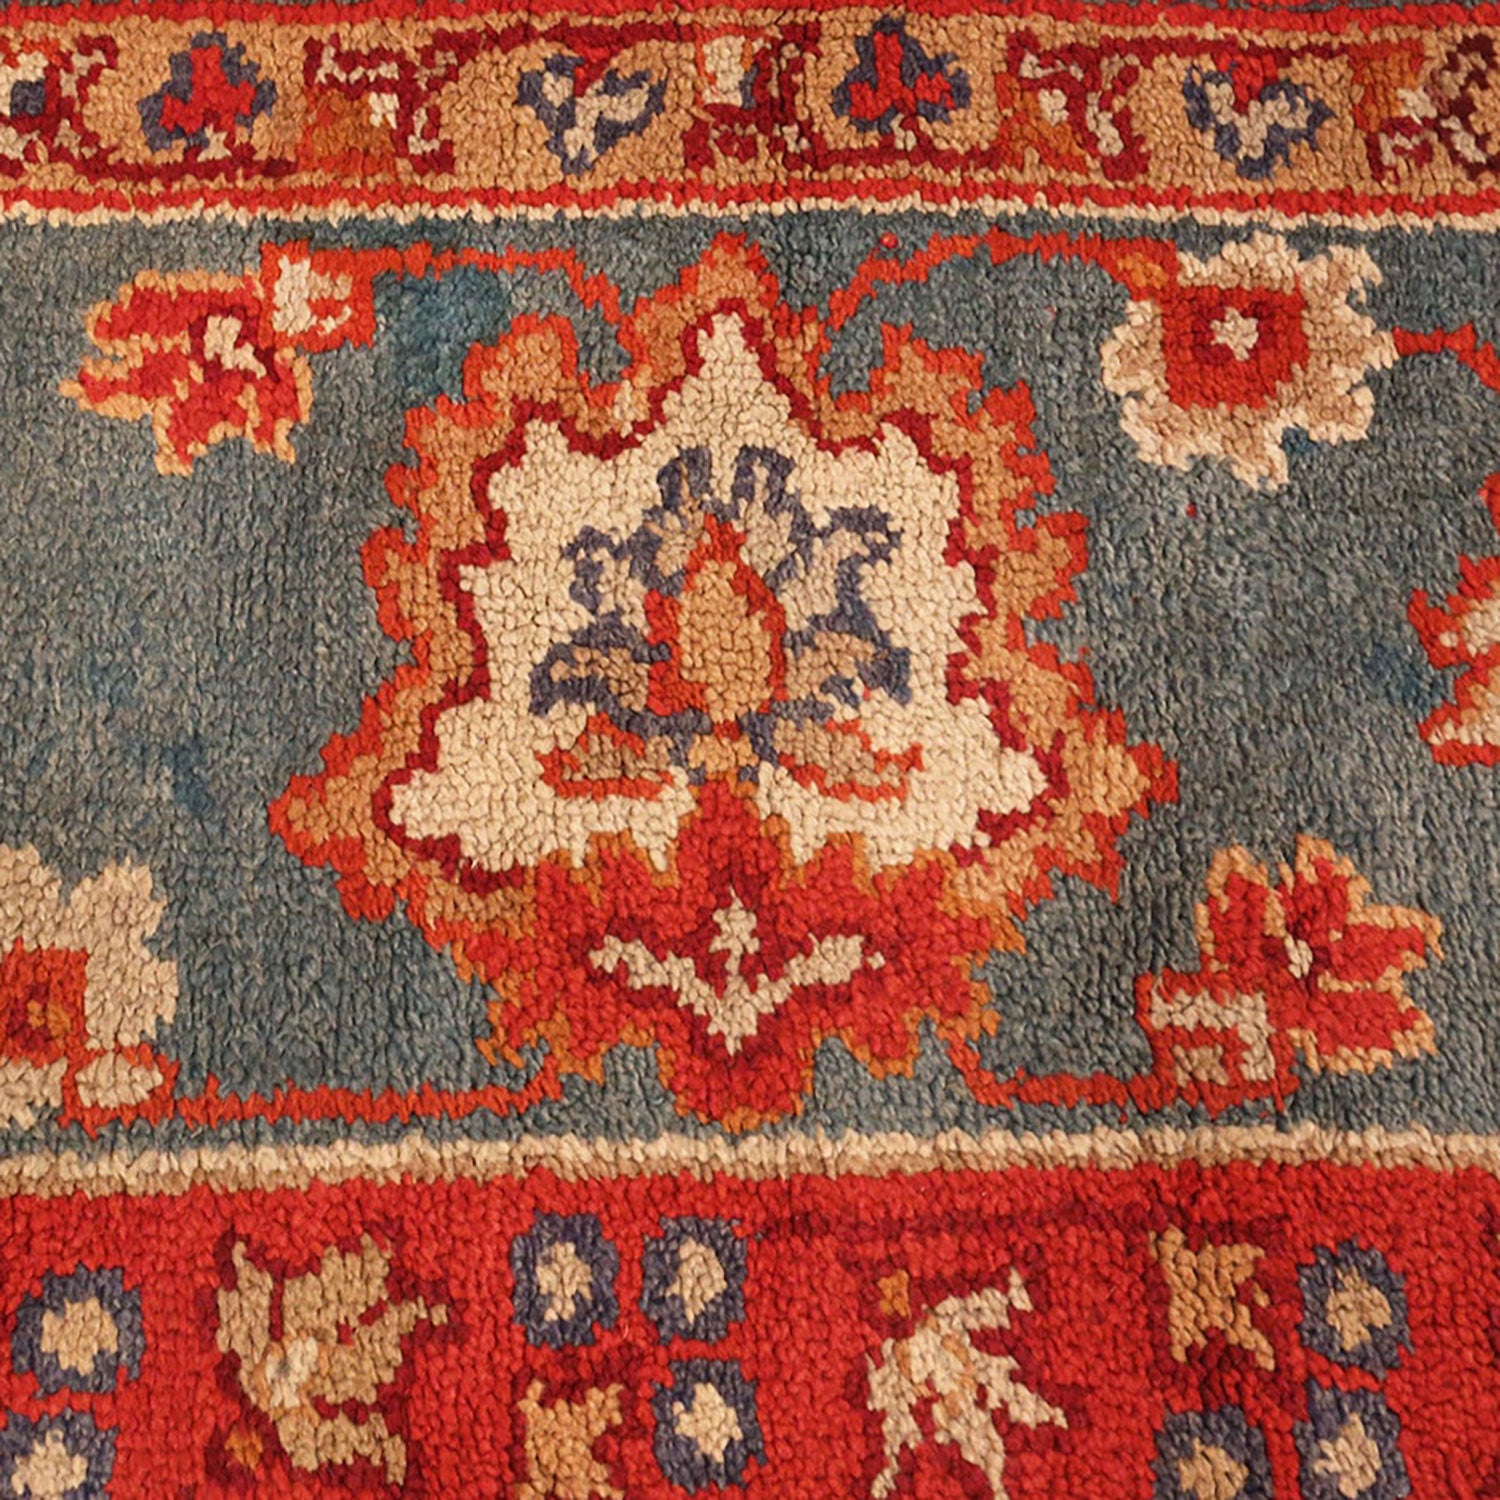 Close-up of a vibrant, well-worn traditional floral patterned carpet.